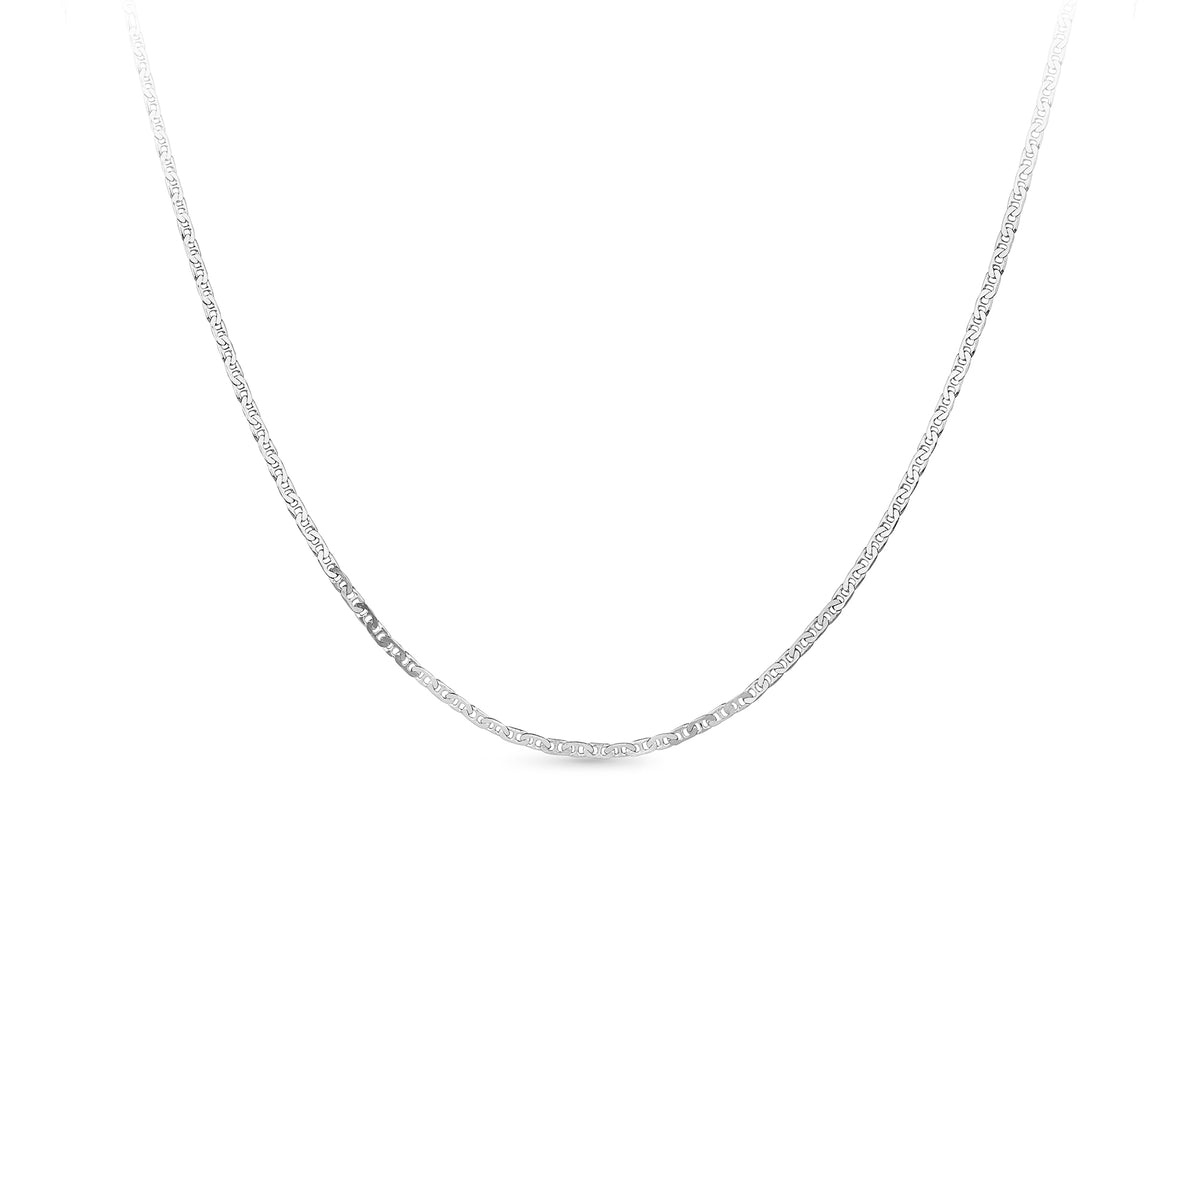 60cm Chain in Sterling Silver